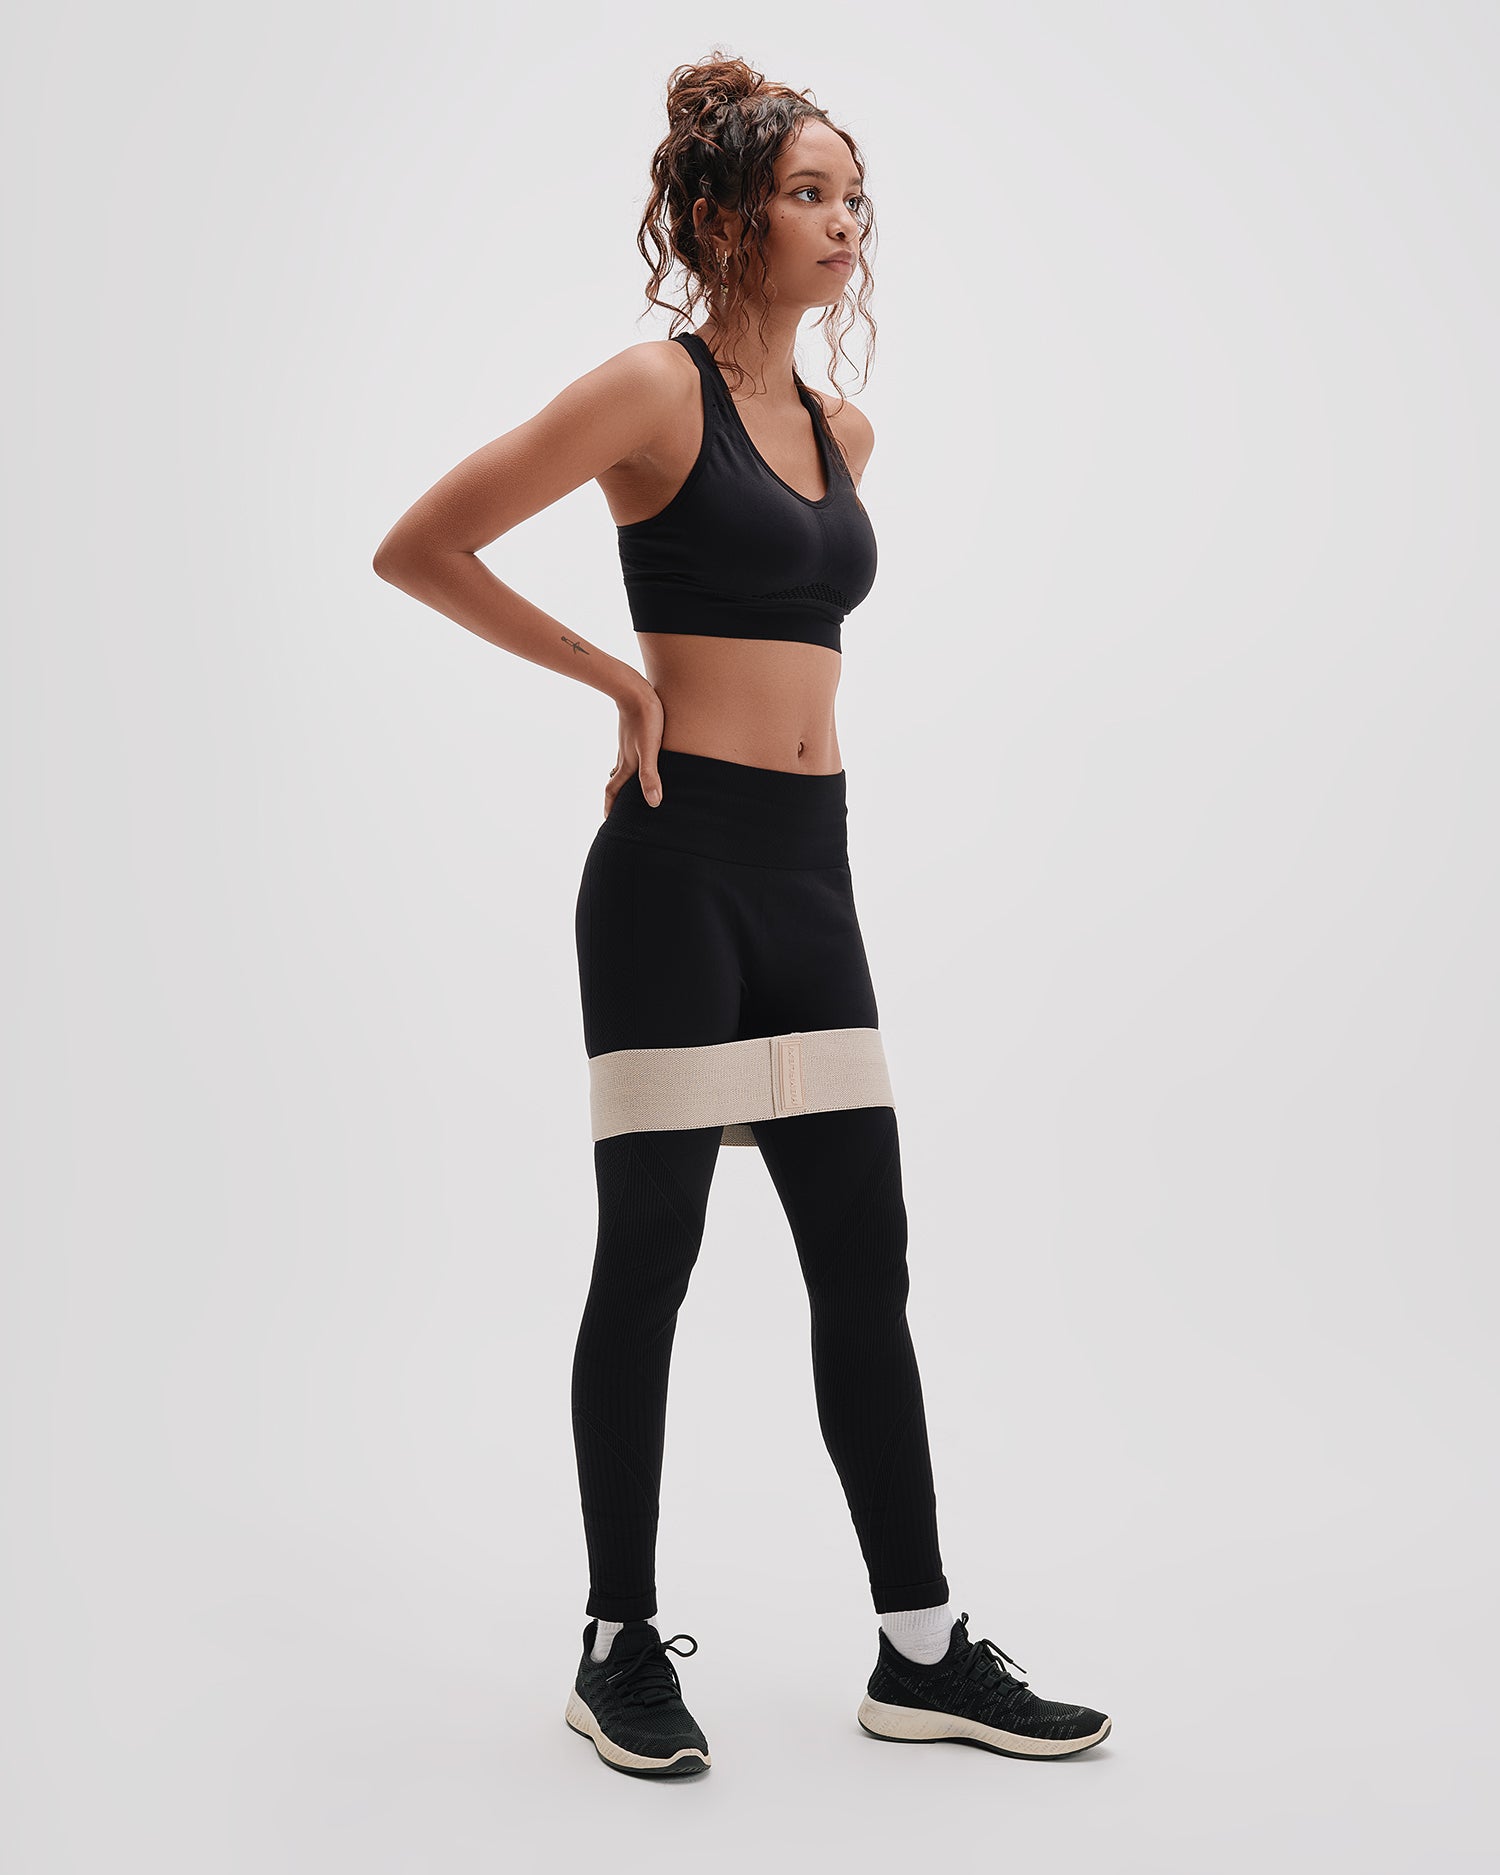 neutral fabric resistance band